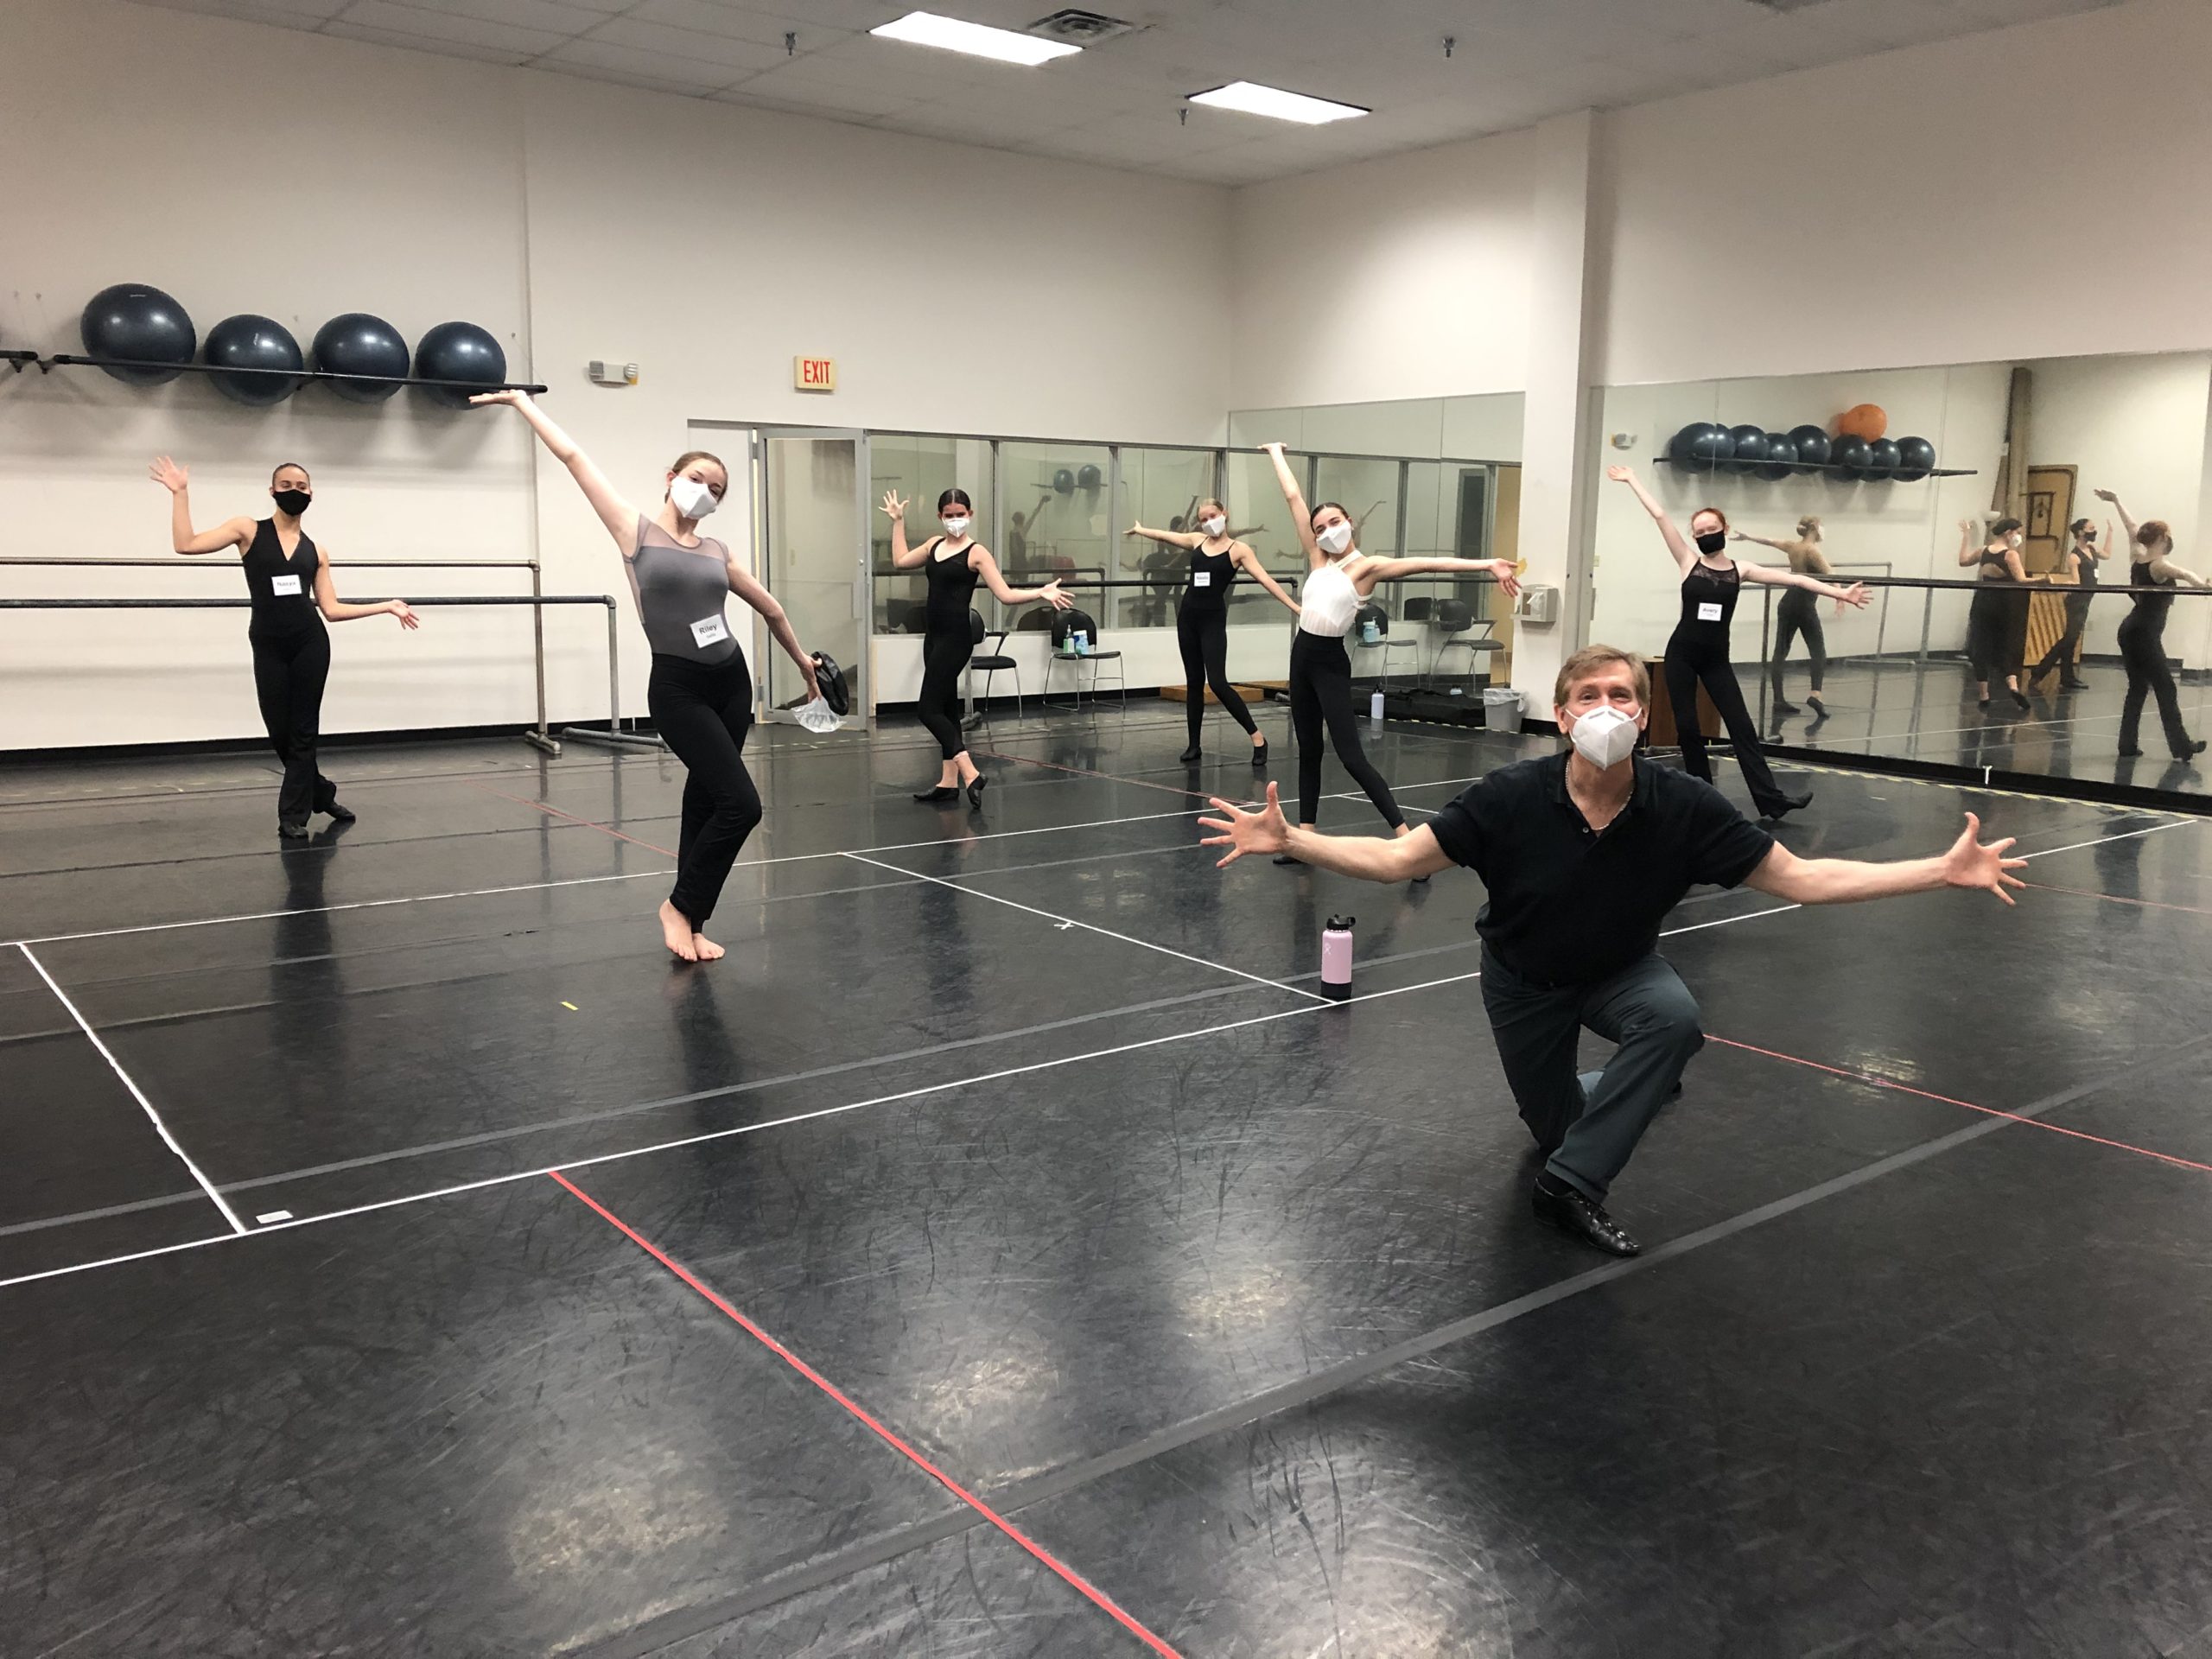 Dance students and instructor wearing masks and socially distanced in the center of a studio.